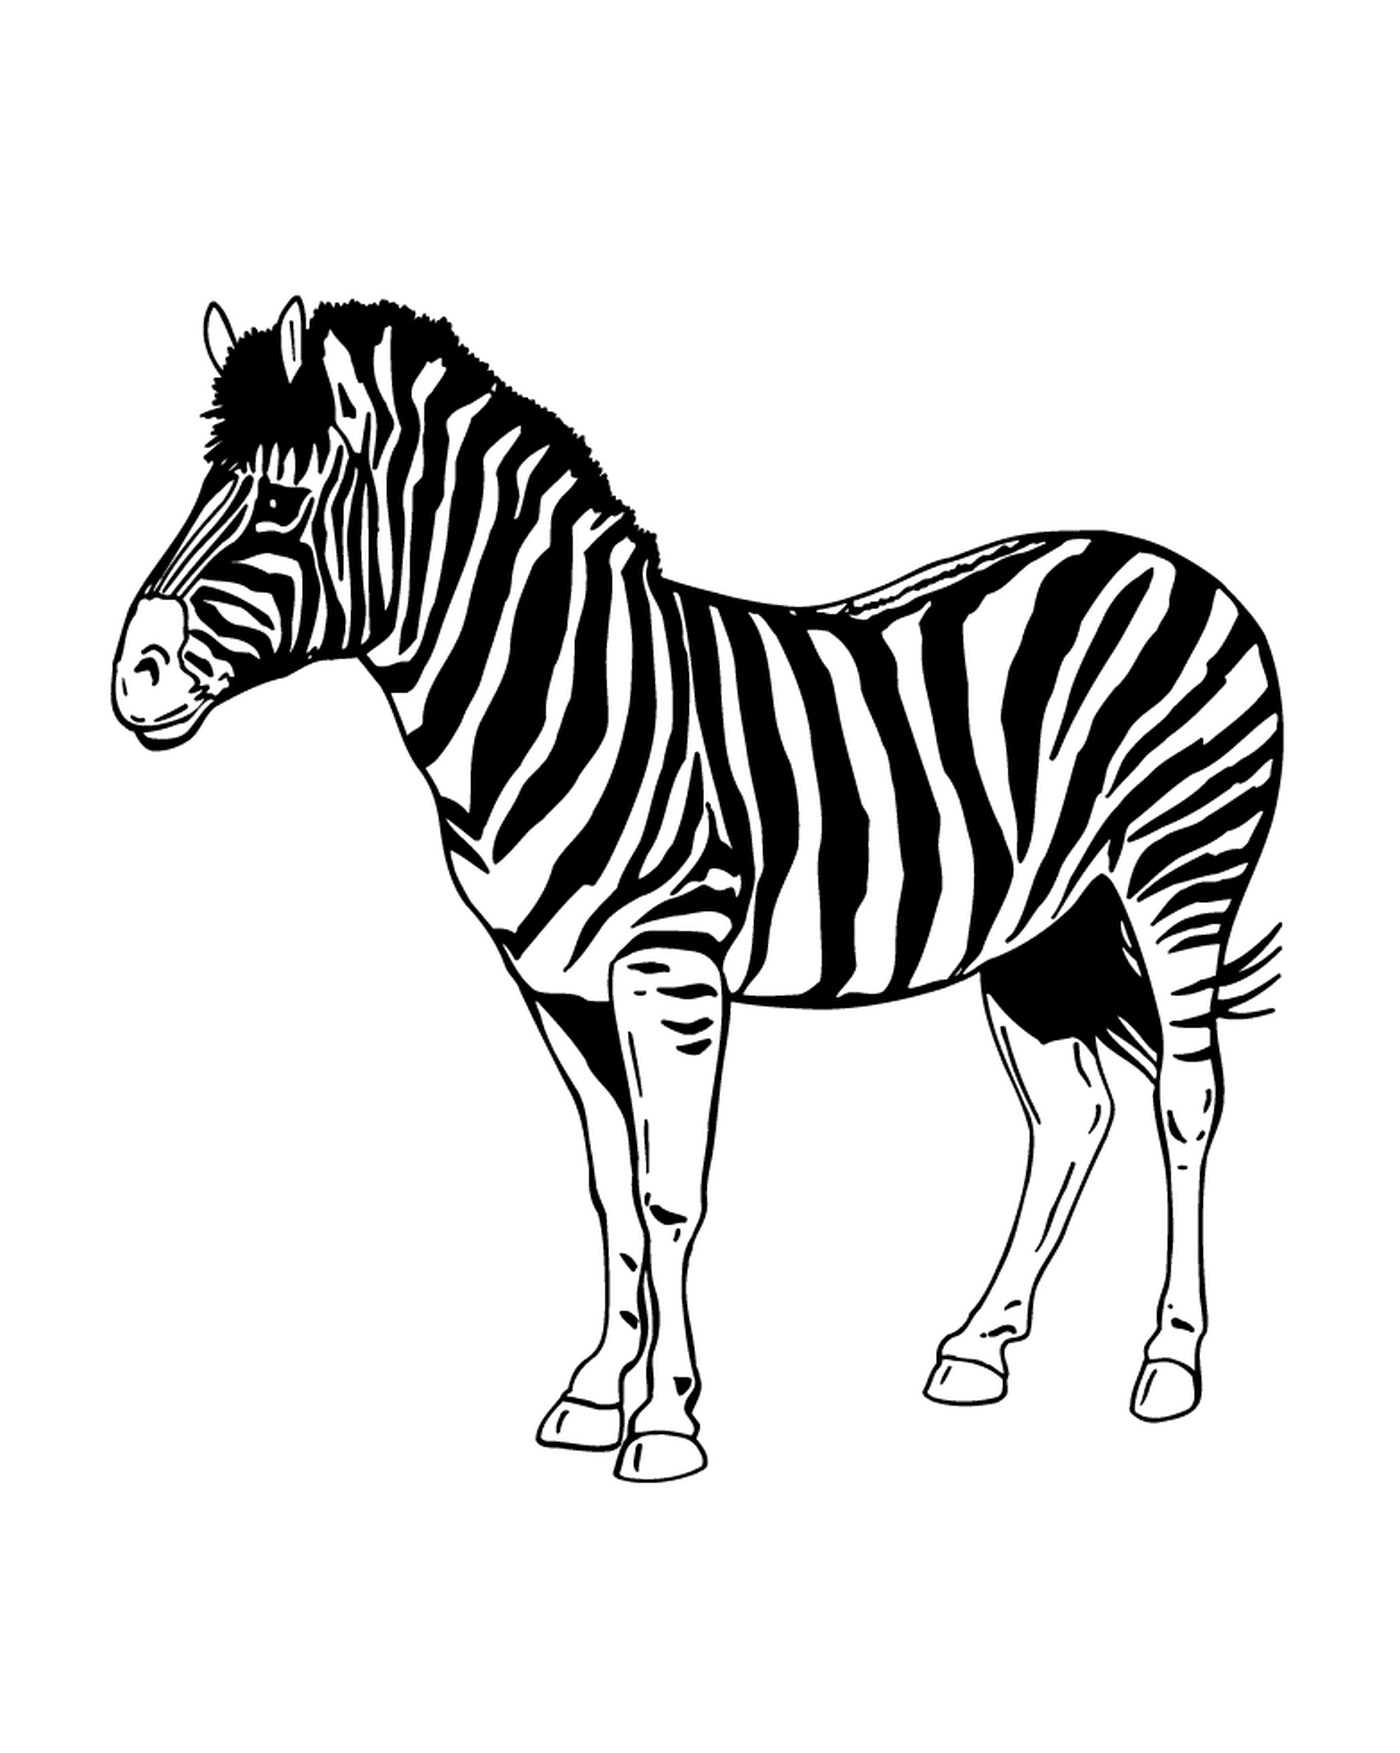  Captivating and mysterious Zebra 